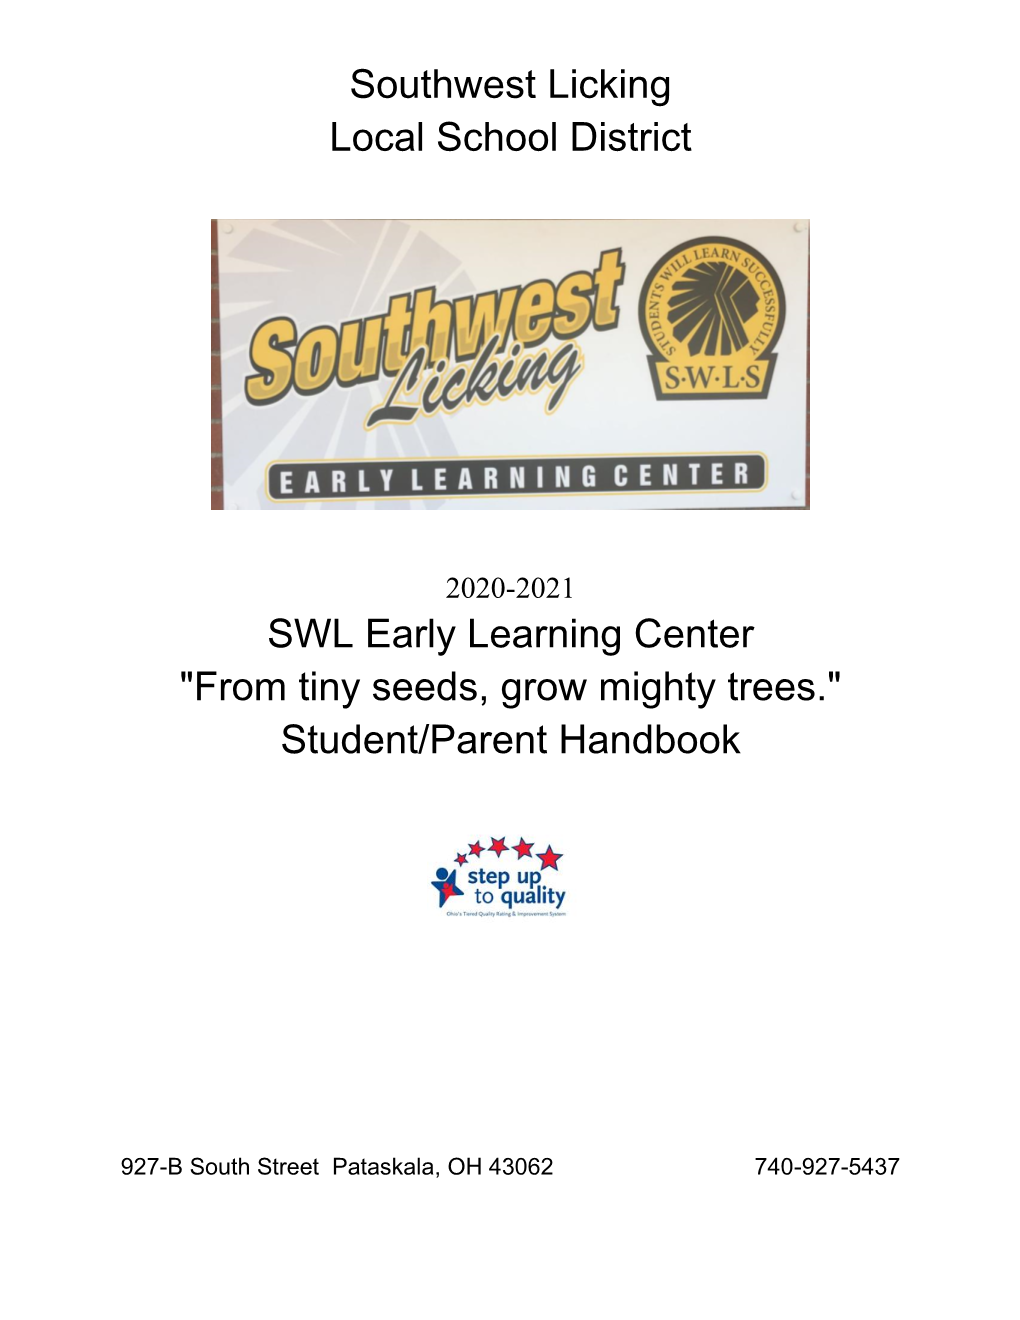 Southwest Licking Local School District SWL Early